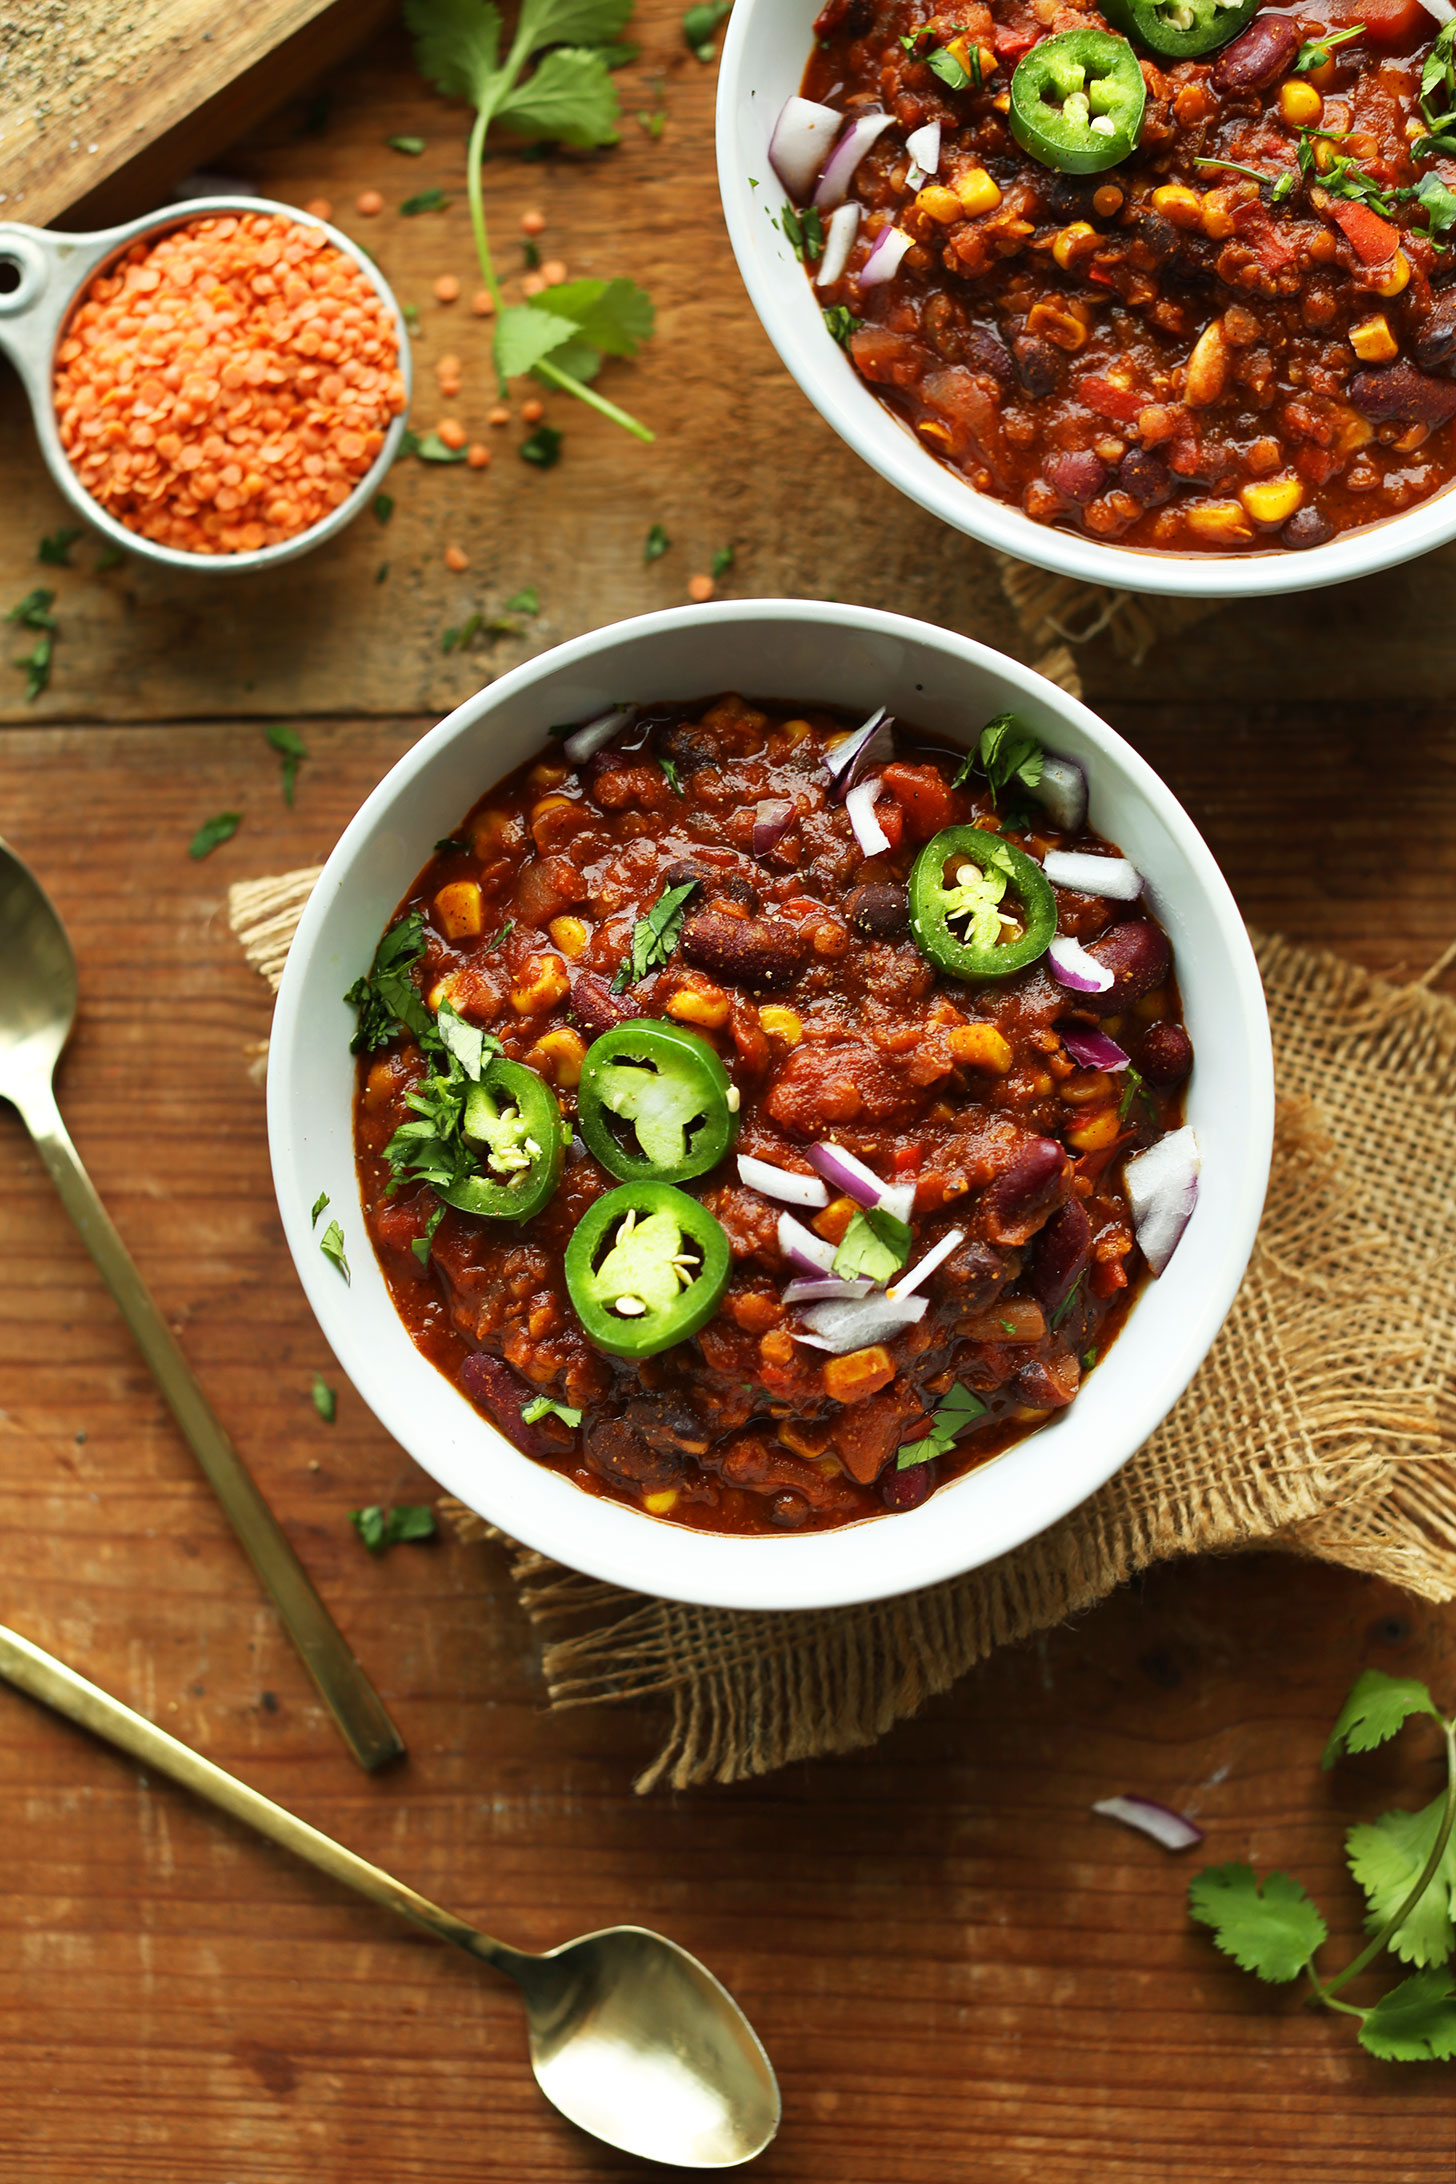 Bowls of our hearty protein-packed vegan Lentil and Black Bean Chili recipe